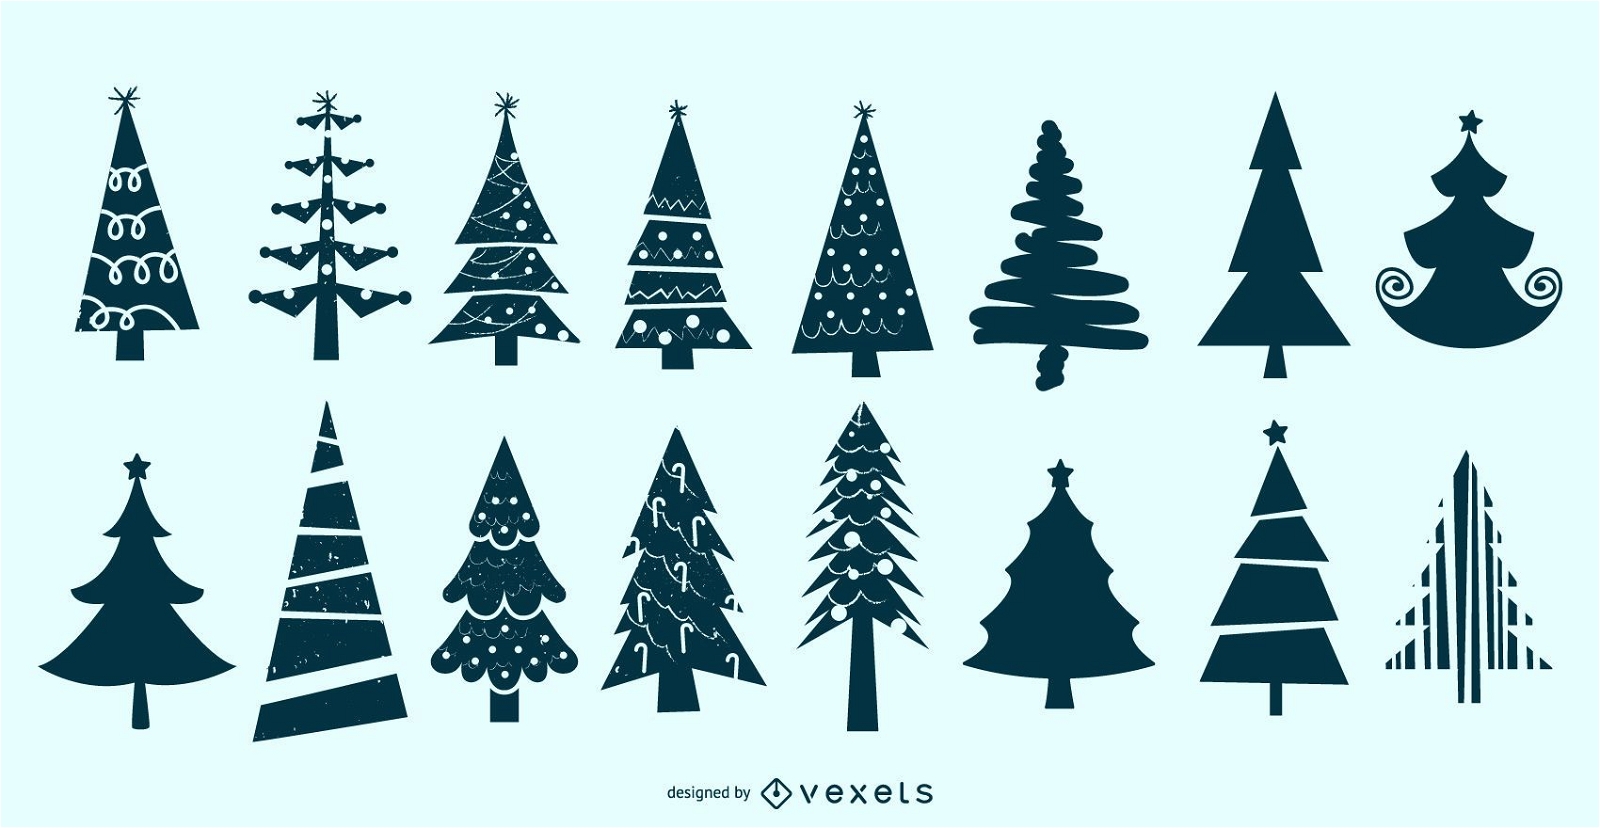 https://images.vexels.com/content/171227/preview/christmas-tree-silhouette-vector-set-34eba1.png